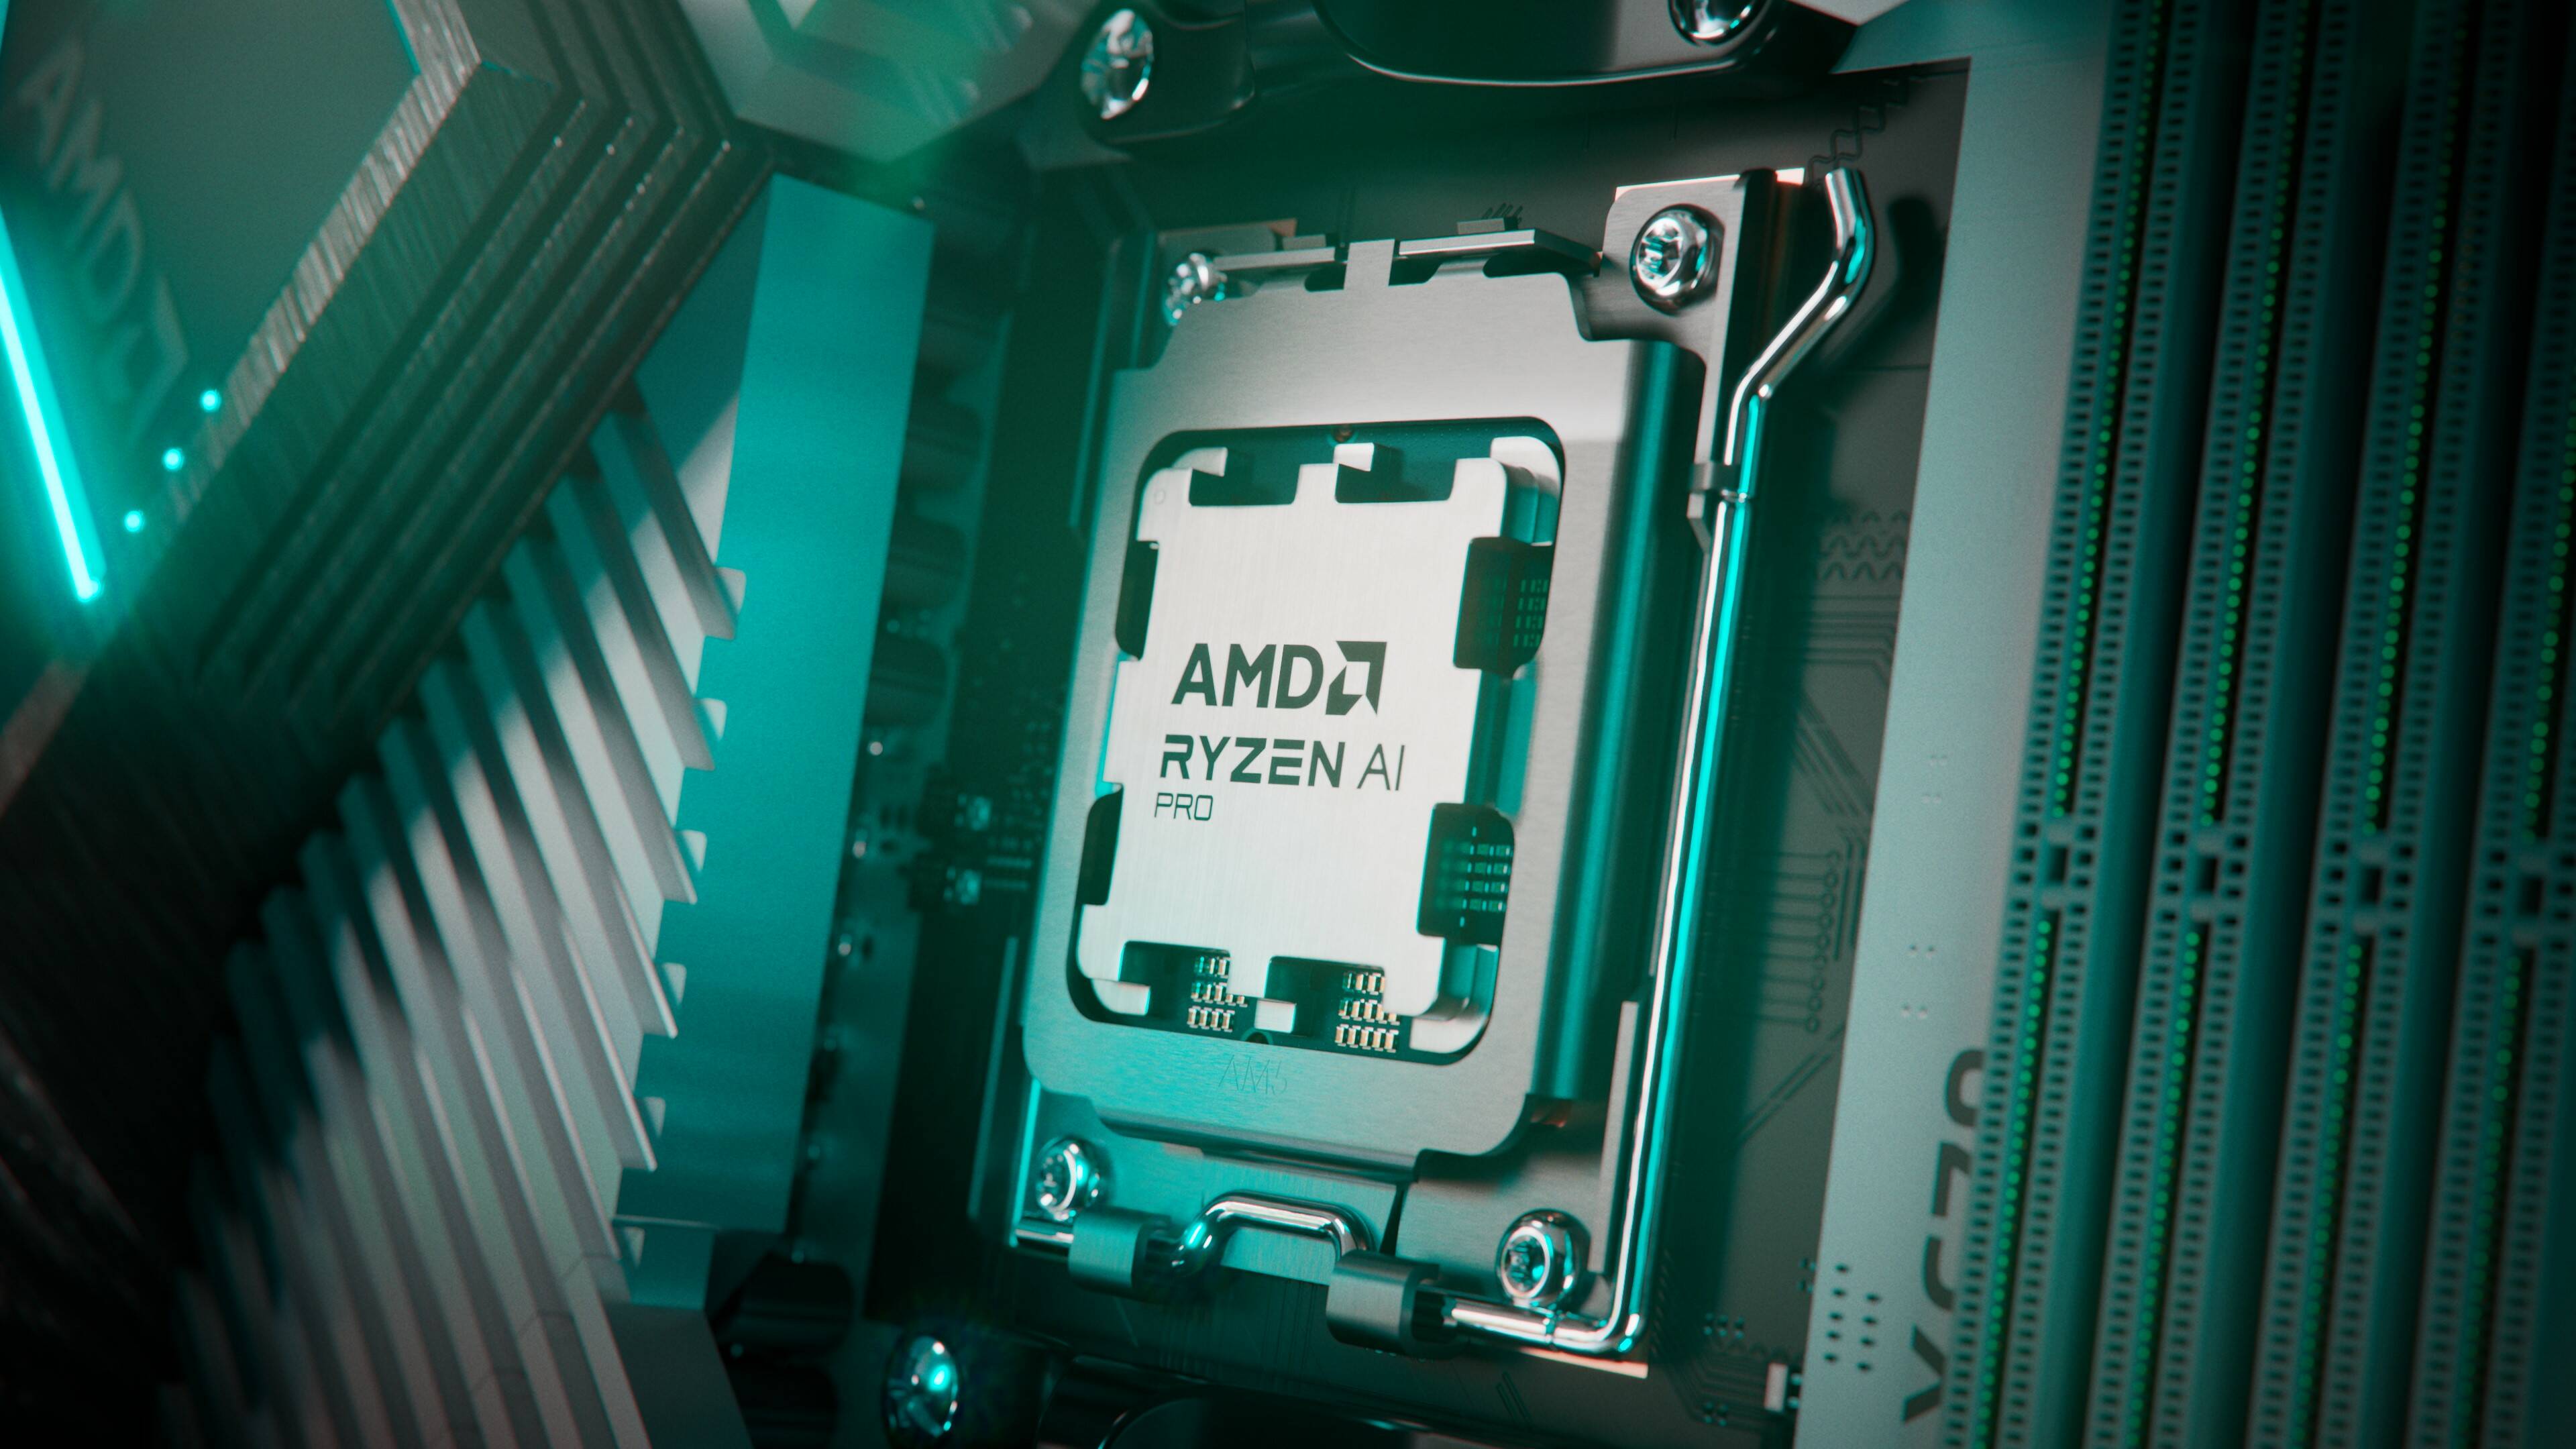 Latest AMD Ryzen Pro chips are similar silicon, more smarts